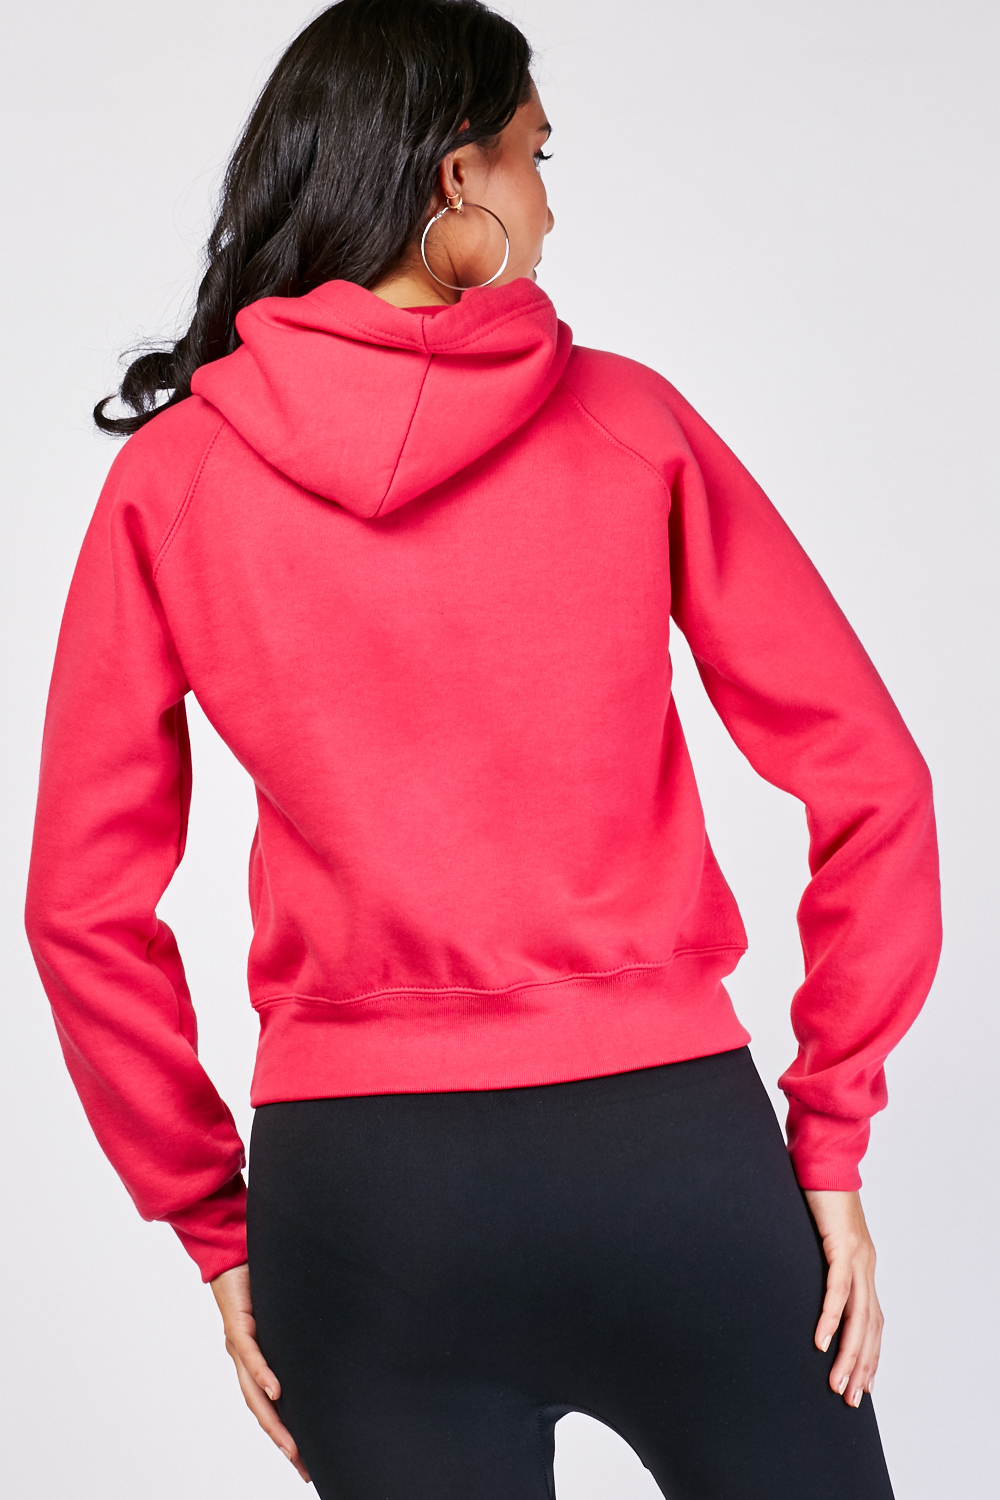 Pouch Pocket Front Pink Hoodie - Just $7